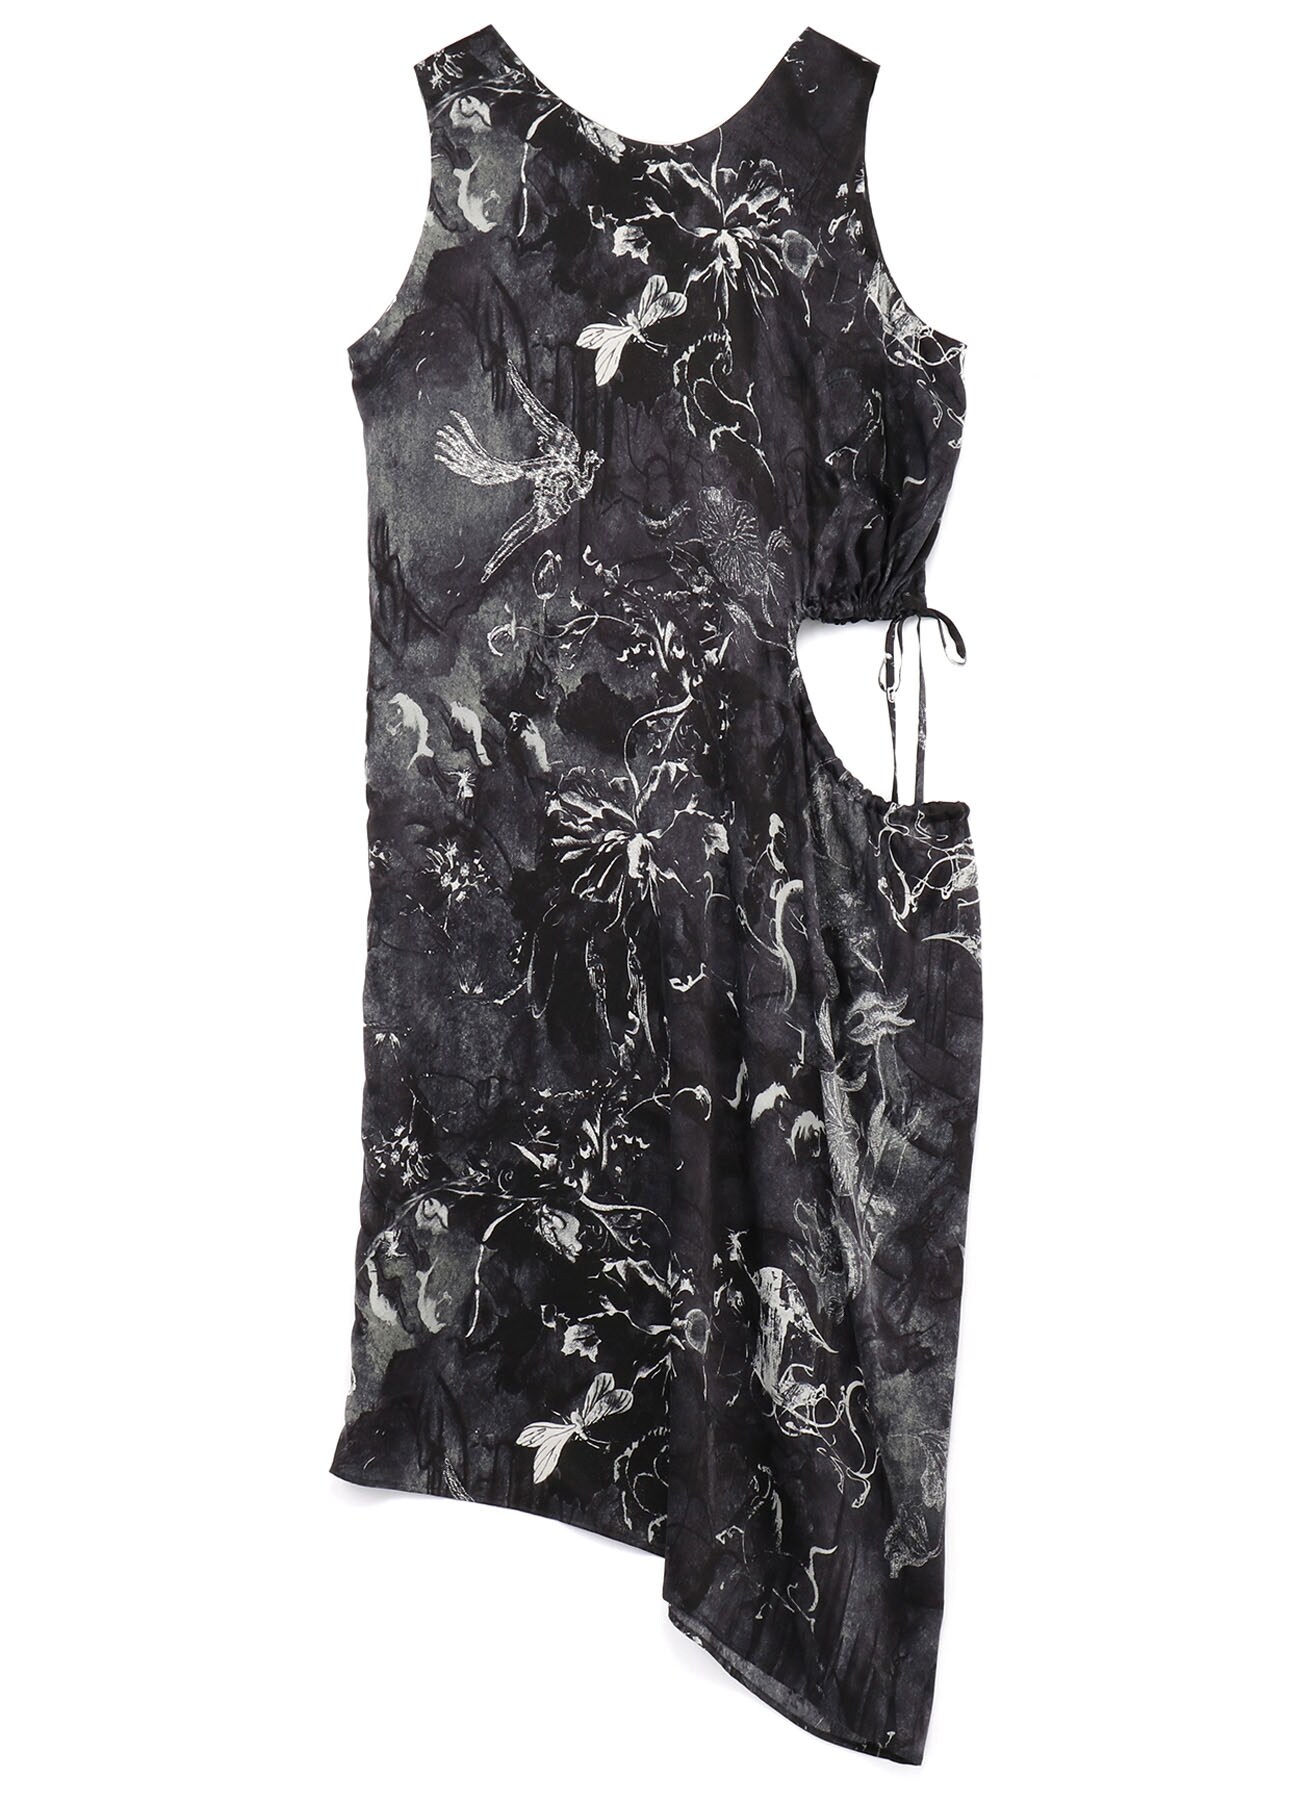 【LES ARTS GRAPHIQUES】 12 MOMME Si/SATIN BLACK WALL RIGHT GATHER HOLE DRESS